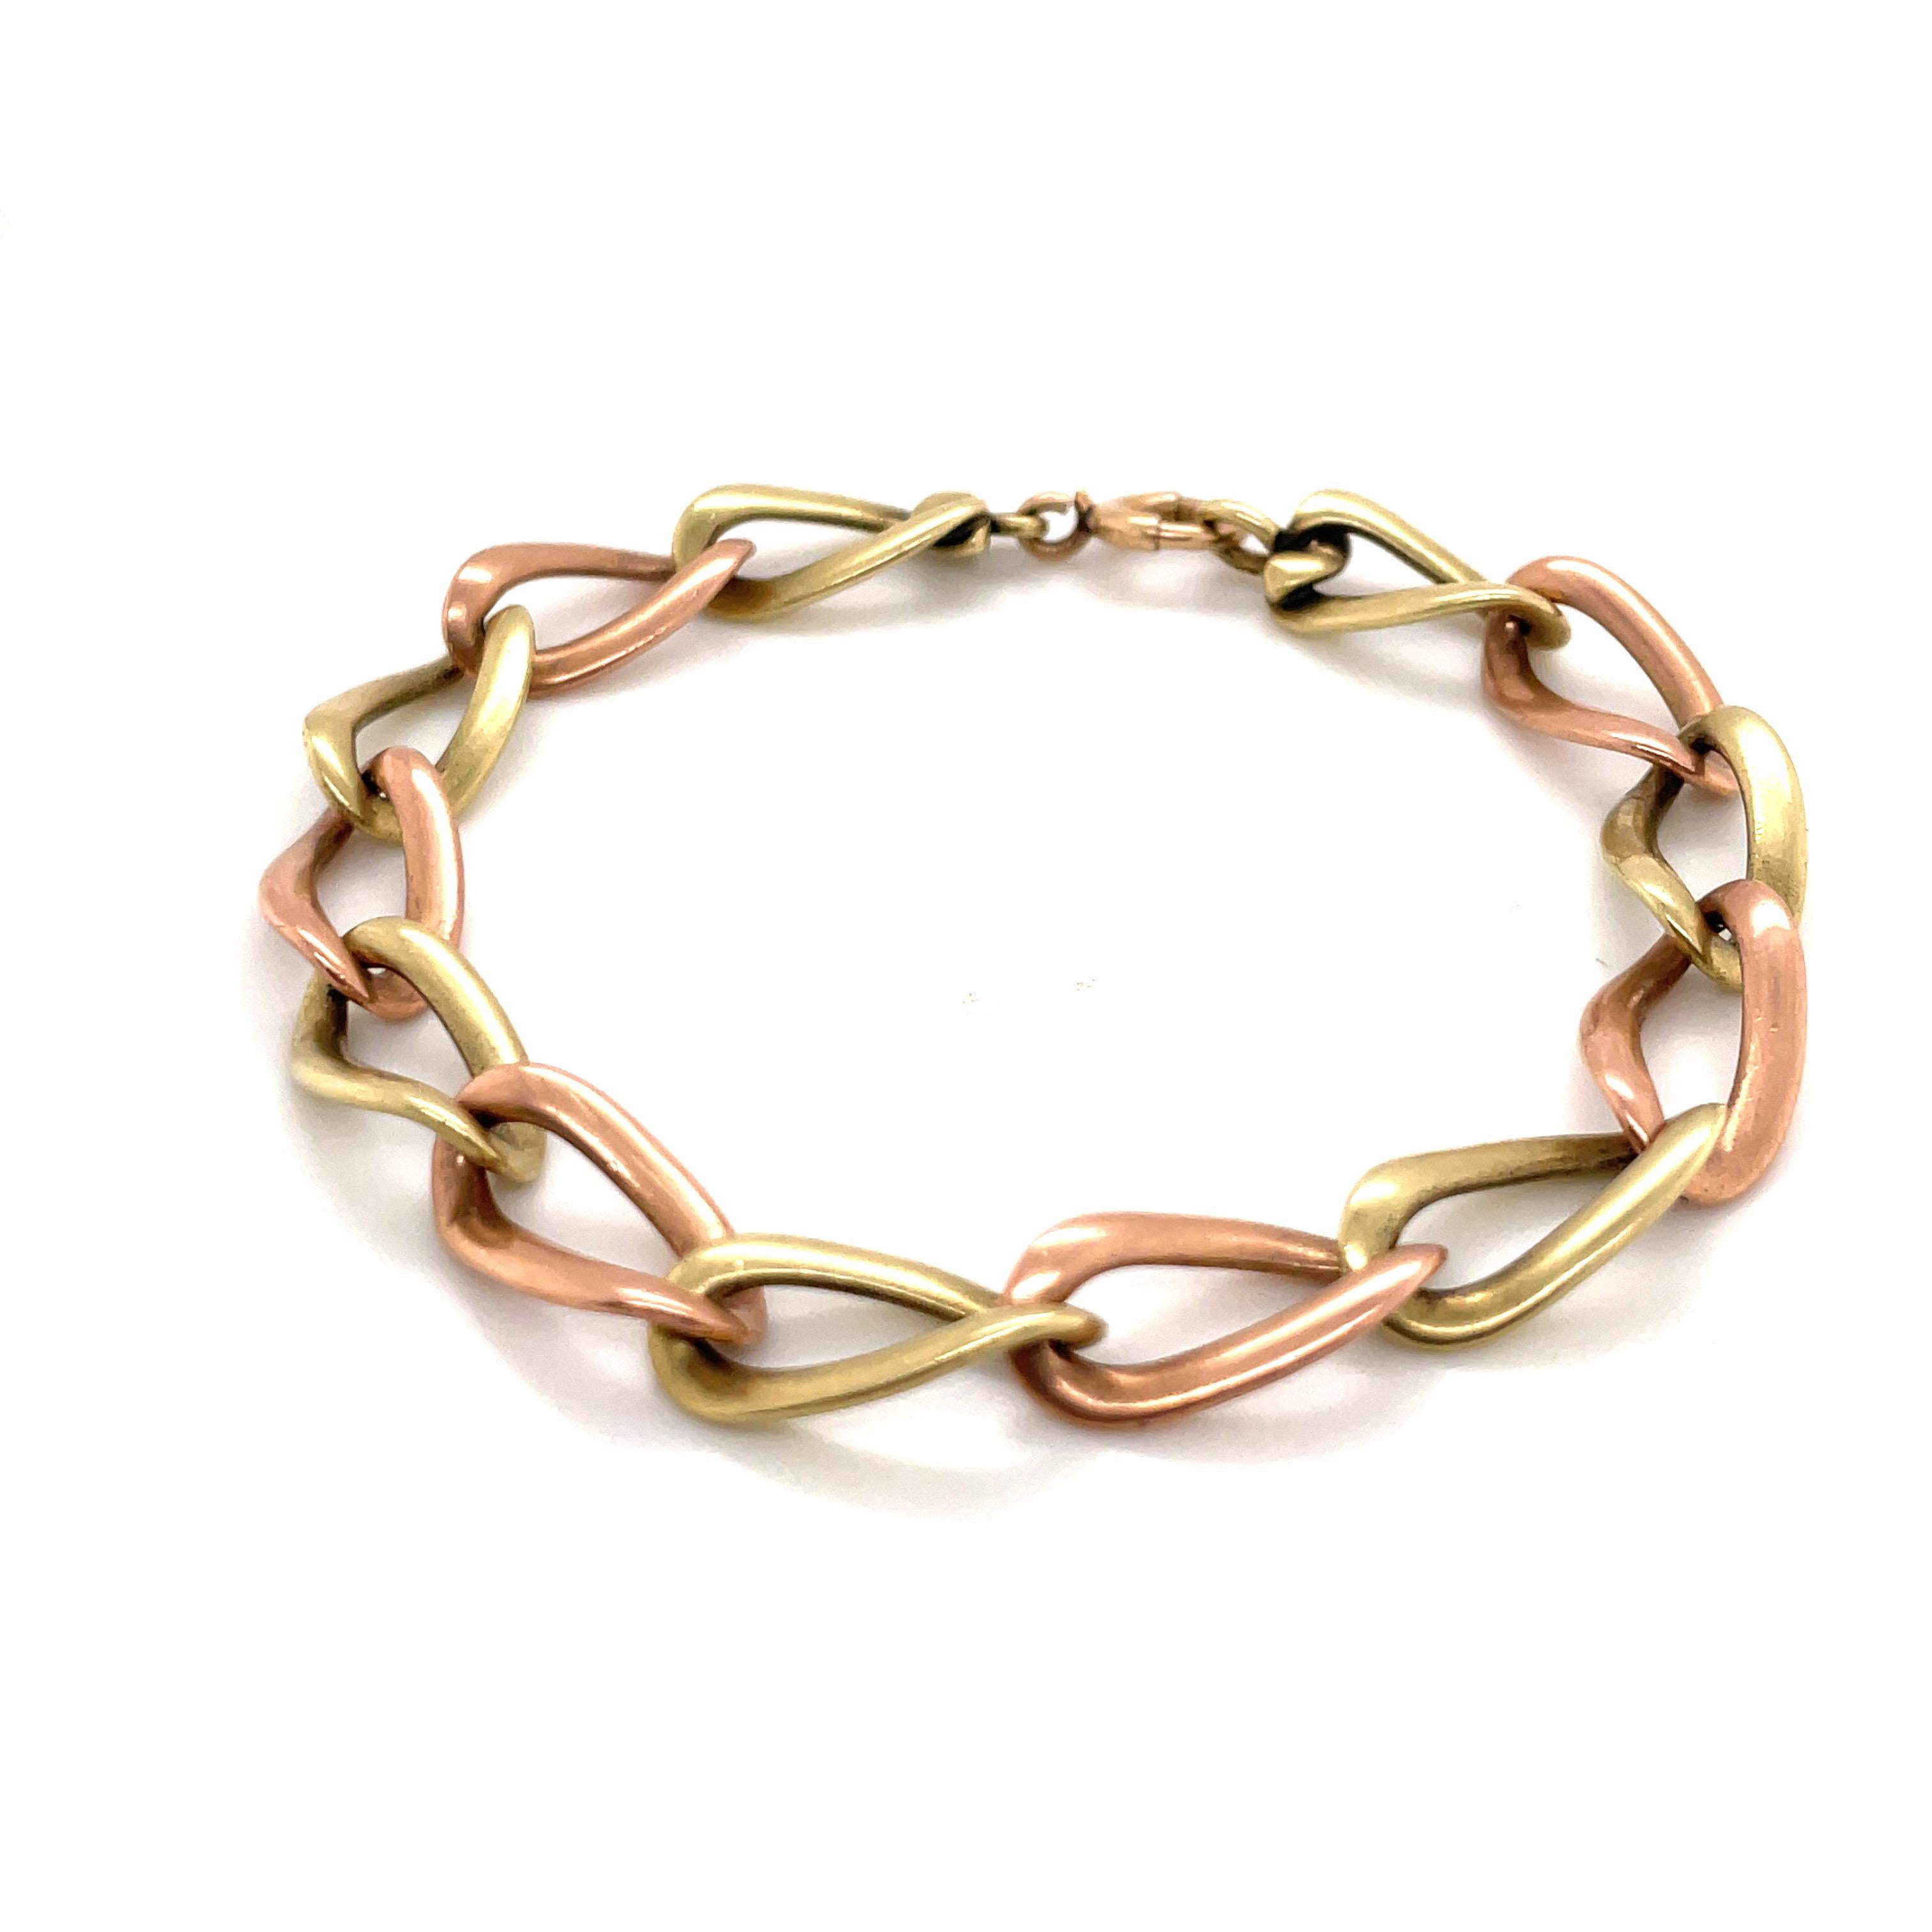 14 Karat Yellow & Rose Gold Twisted Curb Link Bracelet 19.2 Grams In Excellent Condition For Sale In New York, NY